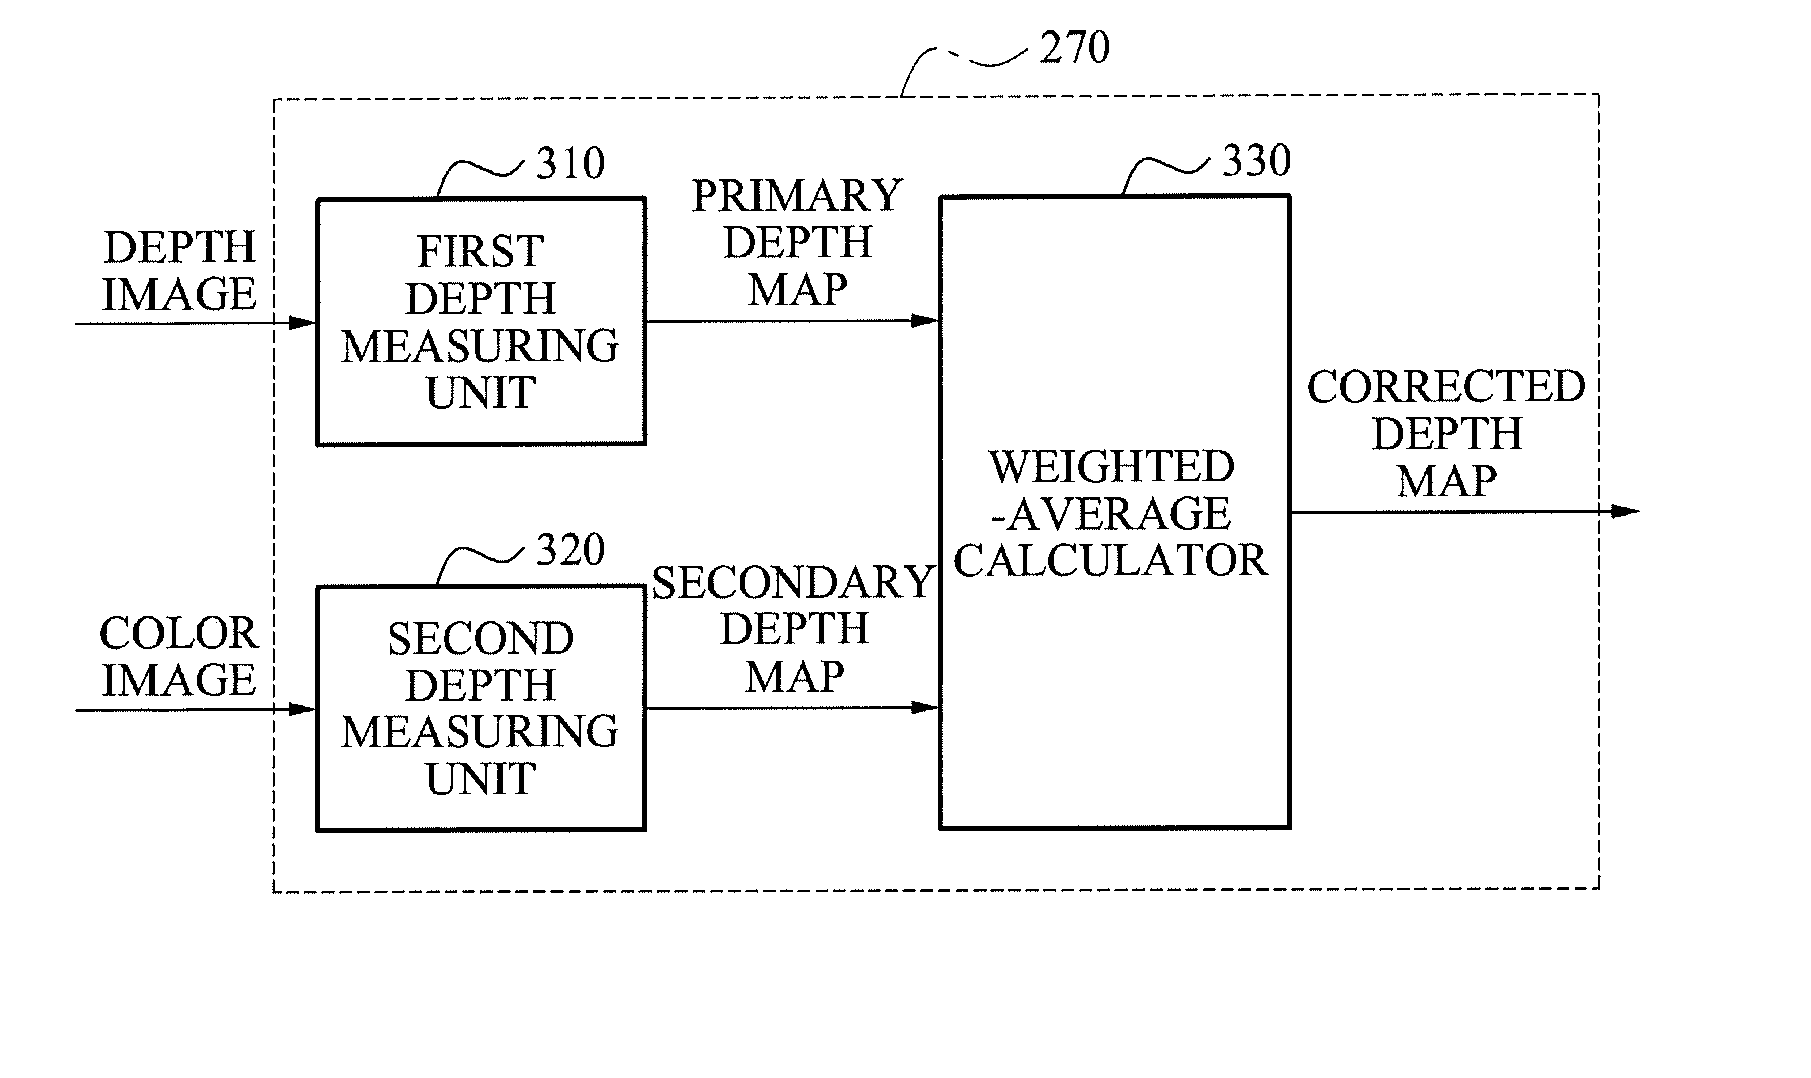 Three dimensional image generating system and method accomodating multi-view imaging